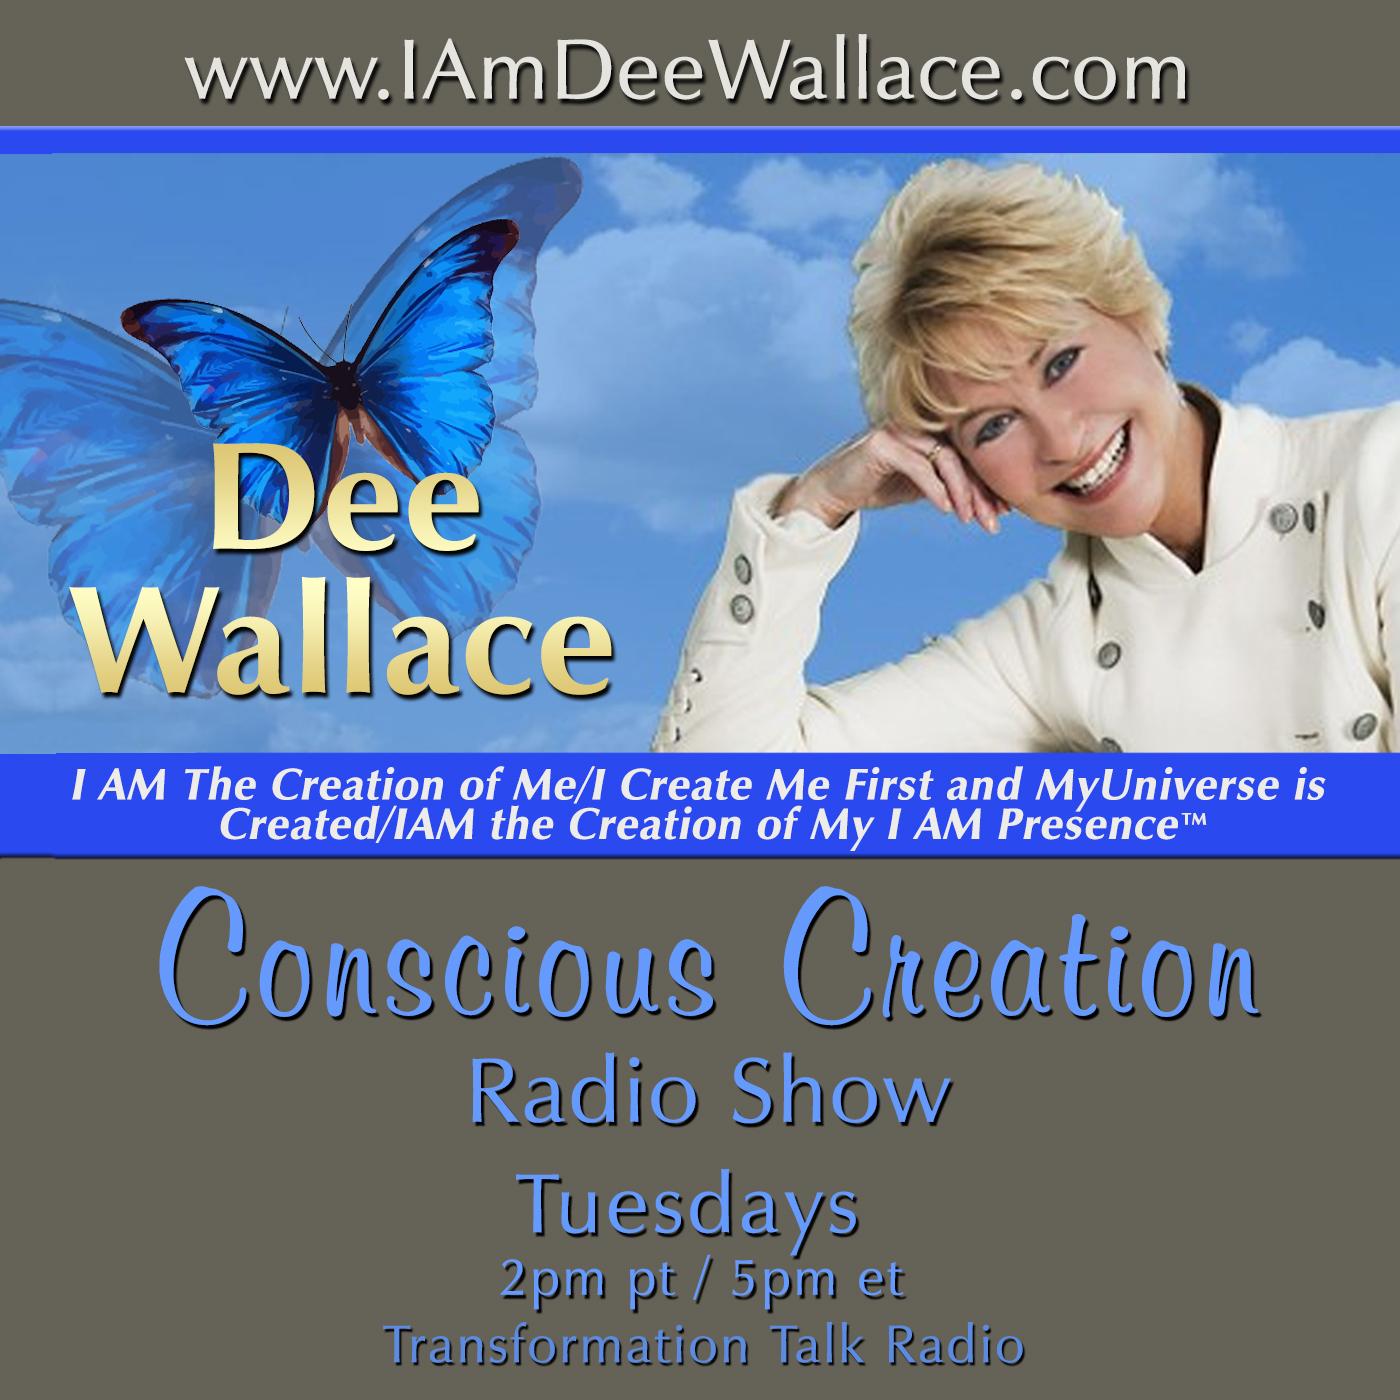 Conscious Creation with Dee Wallace:Transformation Talk Radio